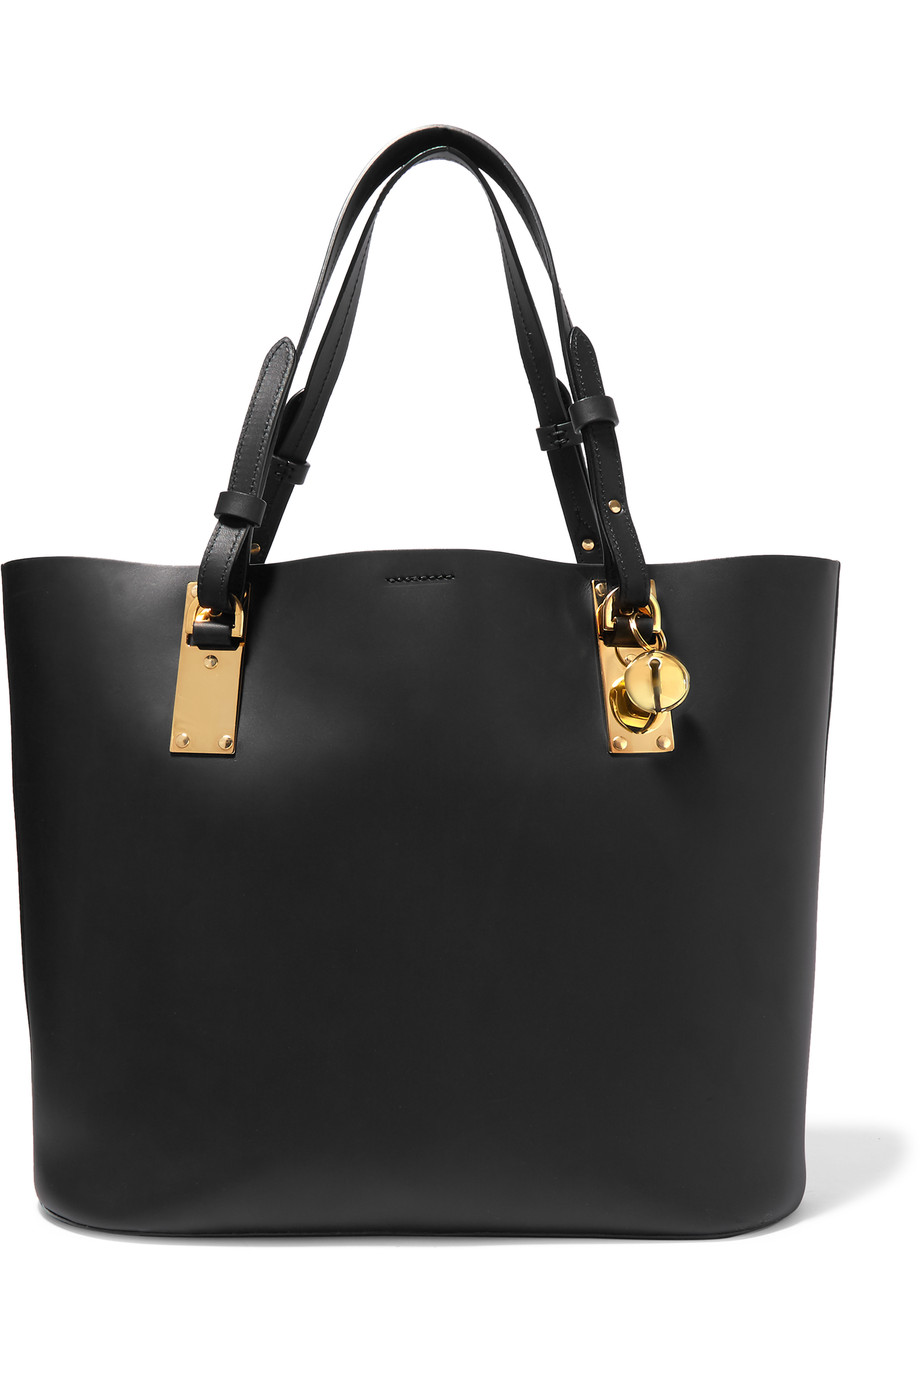 Sophie Hulme Harrison Leather Tote | ModeSens